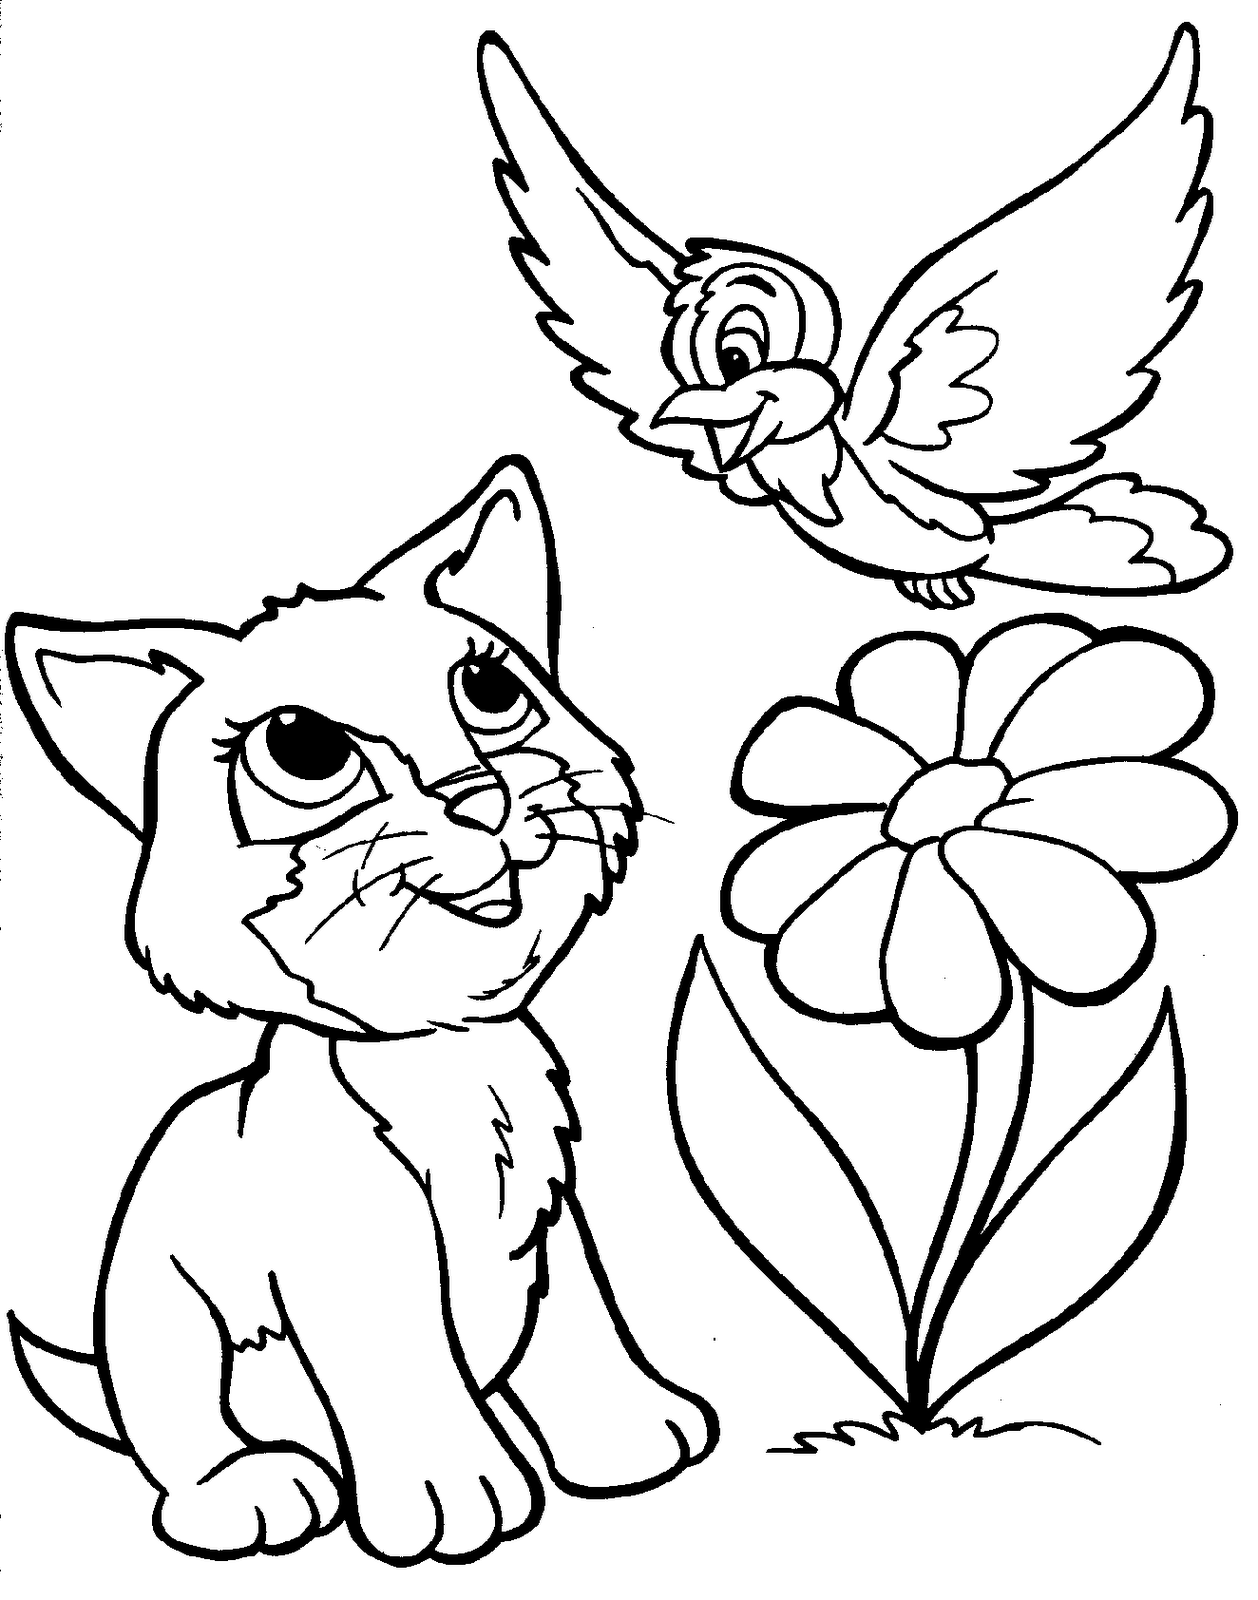 1000+ images about Coloring Pages on Pinterest  Coloring 